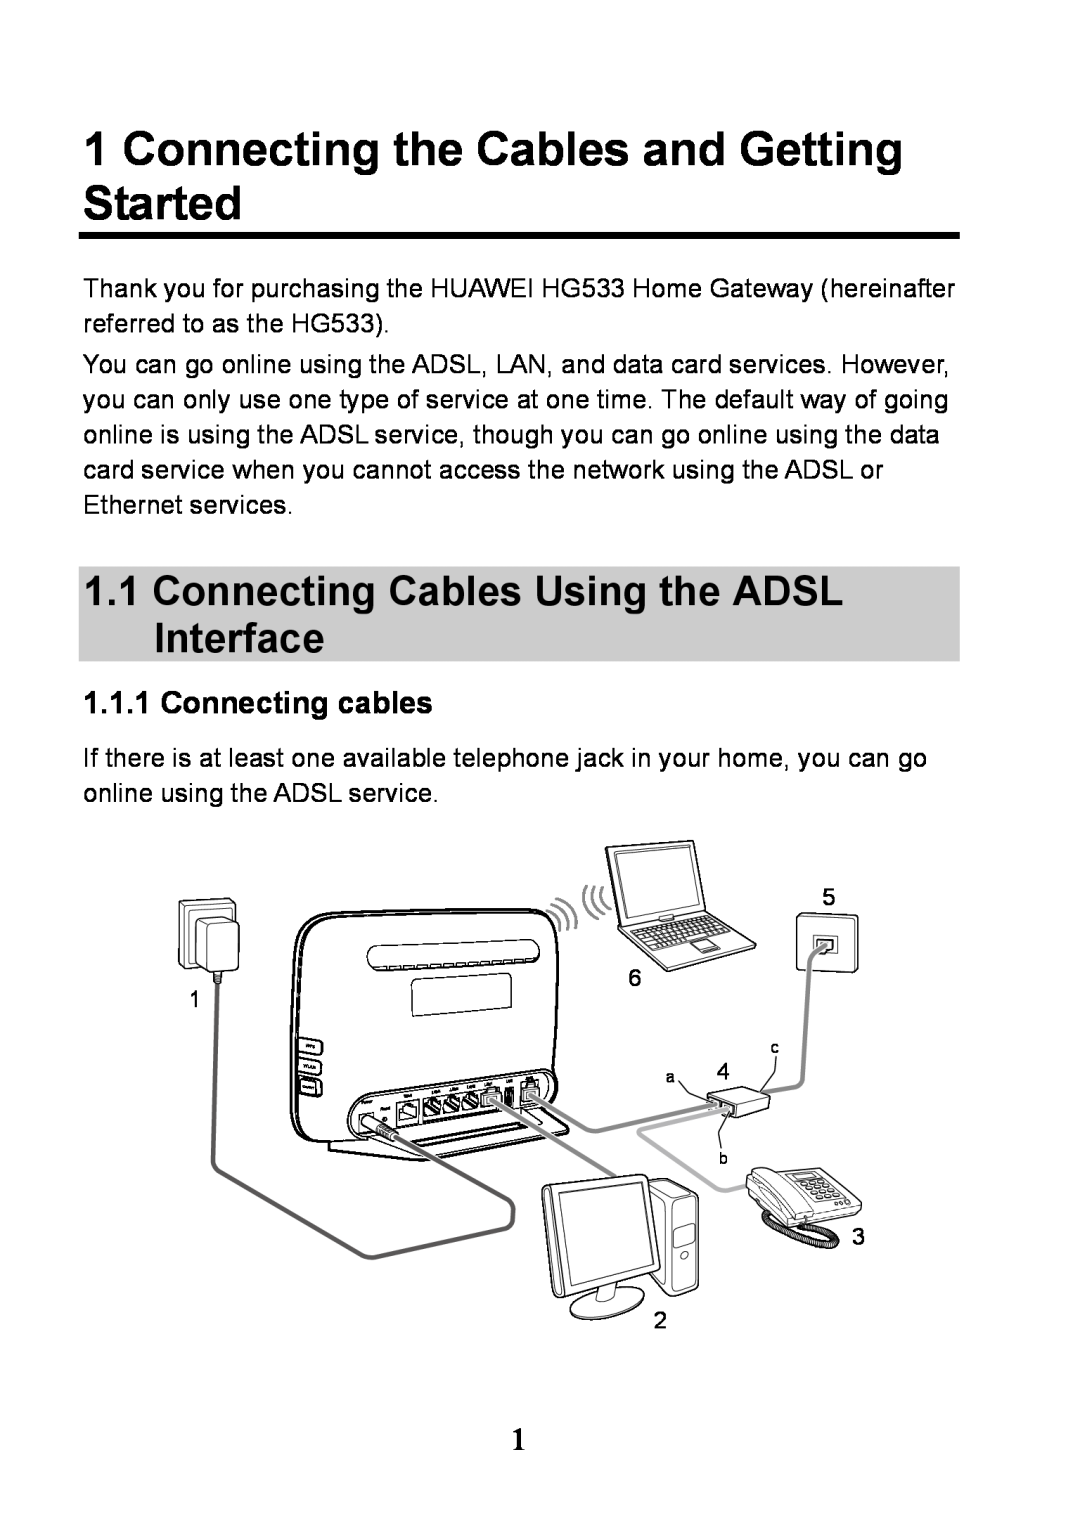 Huawei V100R001 Connecting the Cables and Getting Started, Connecting Cables Using the ADSL Interface, Connecting cables 